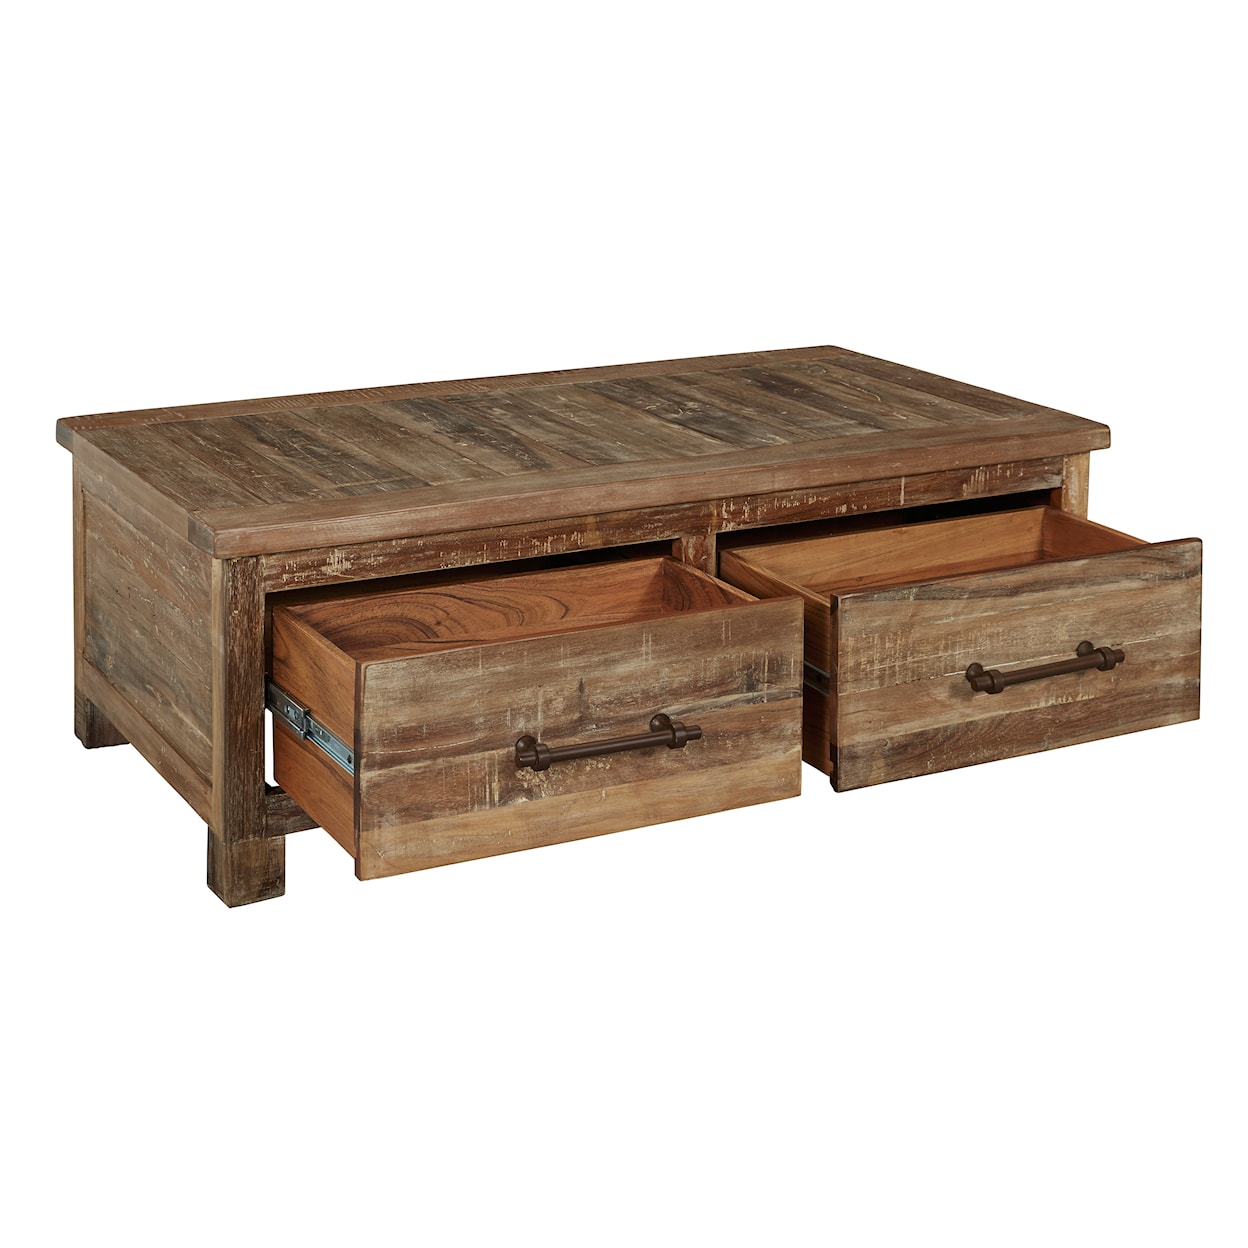 Signature Design by Ashley Randale Coffee Table